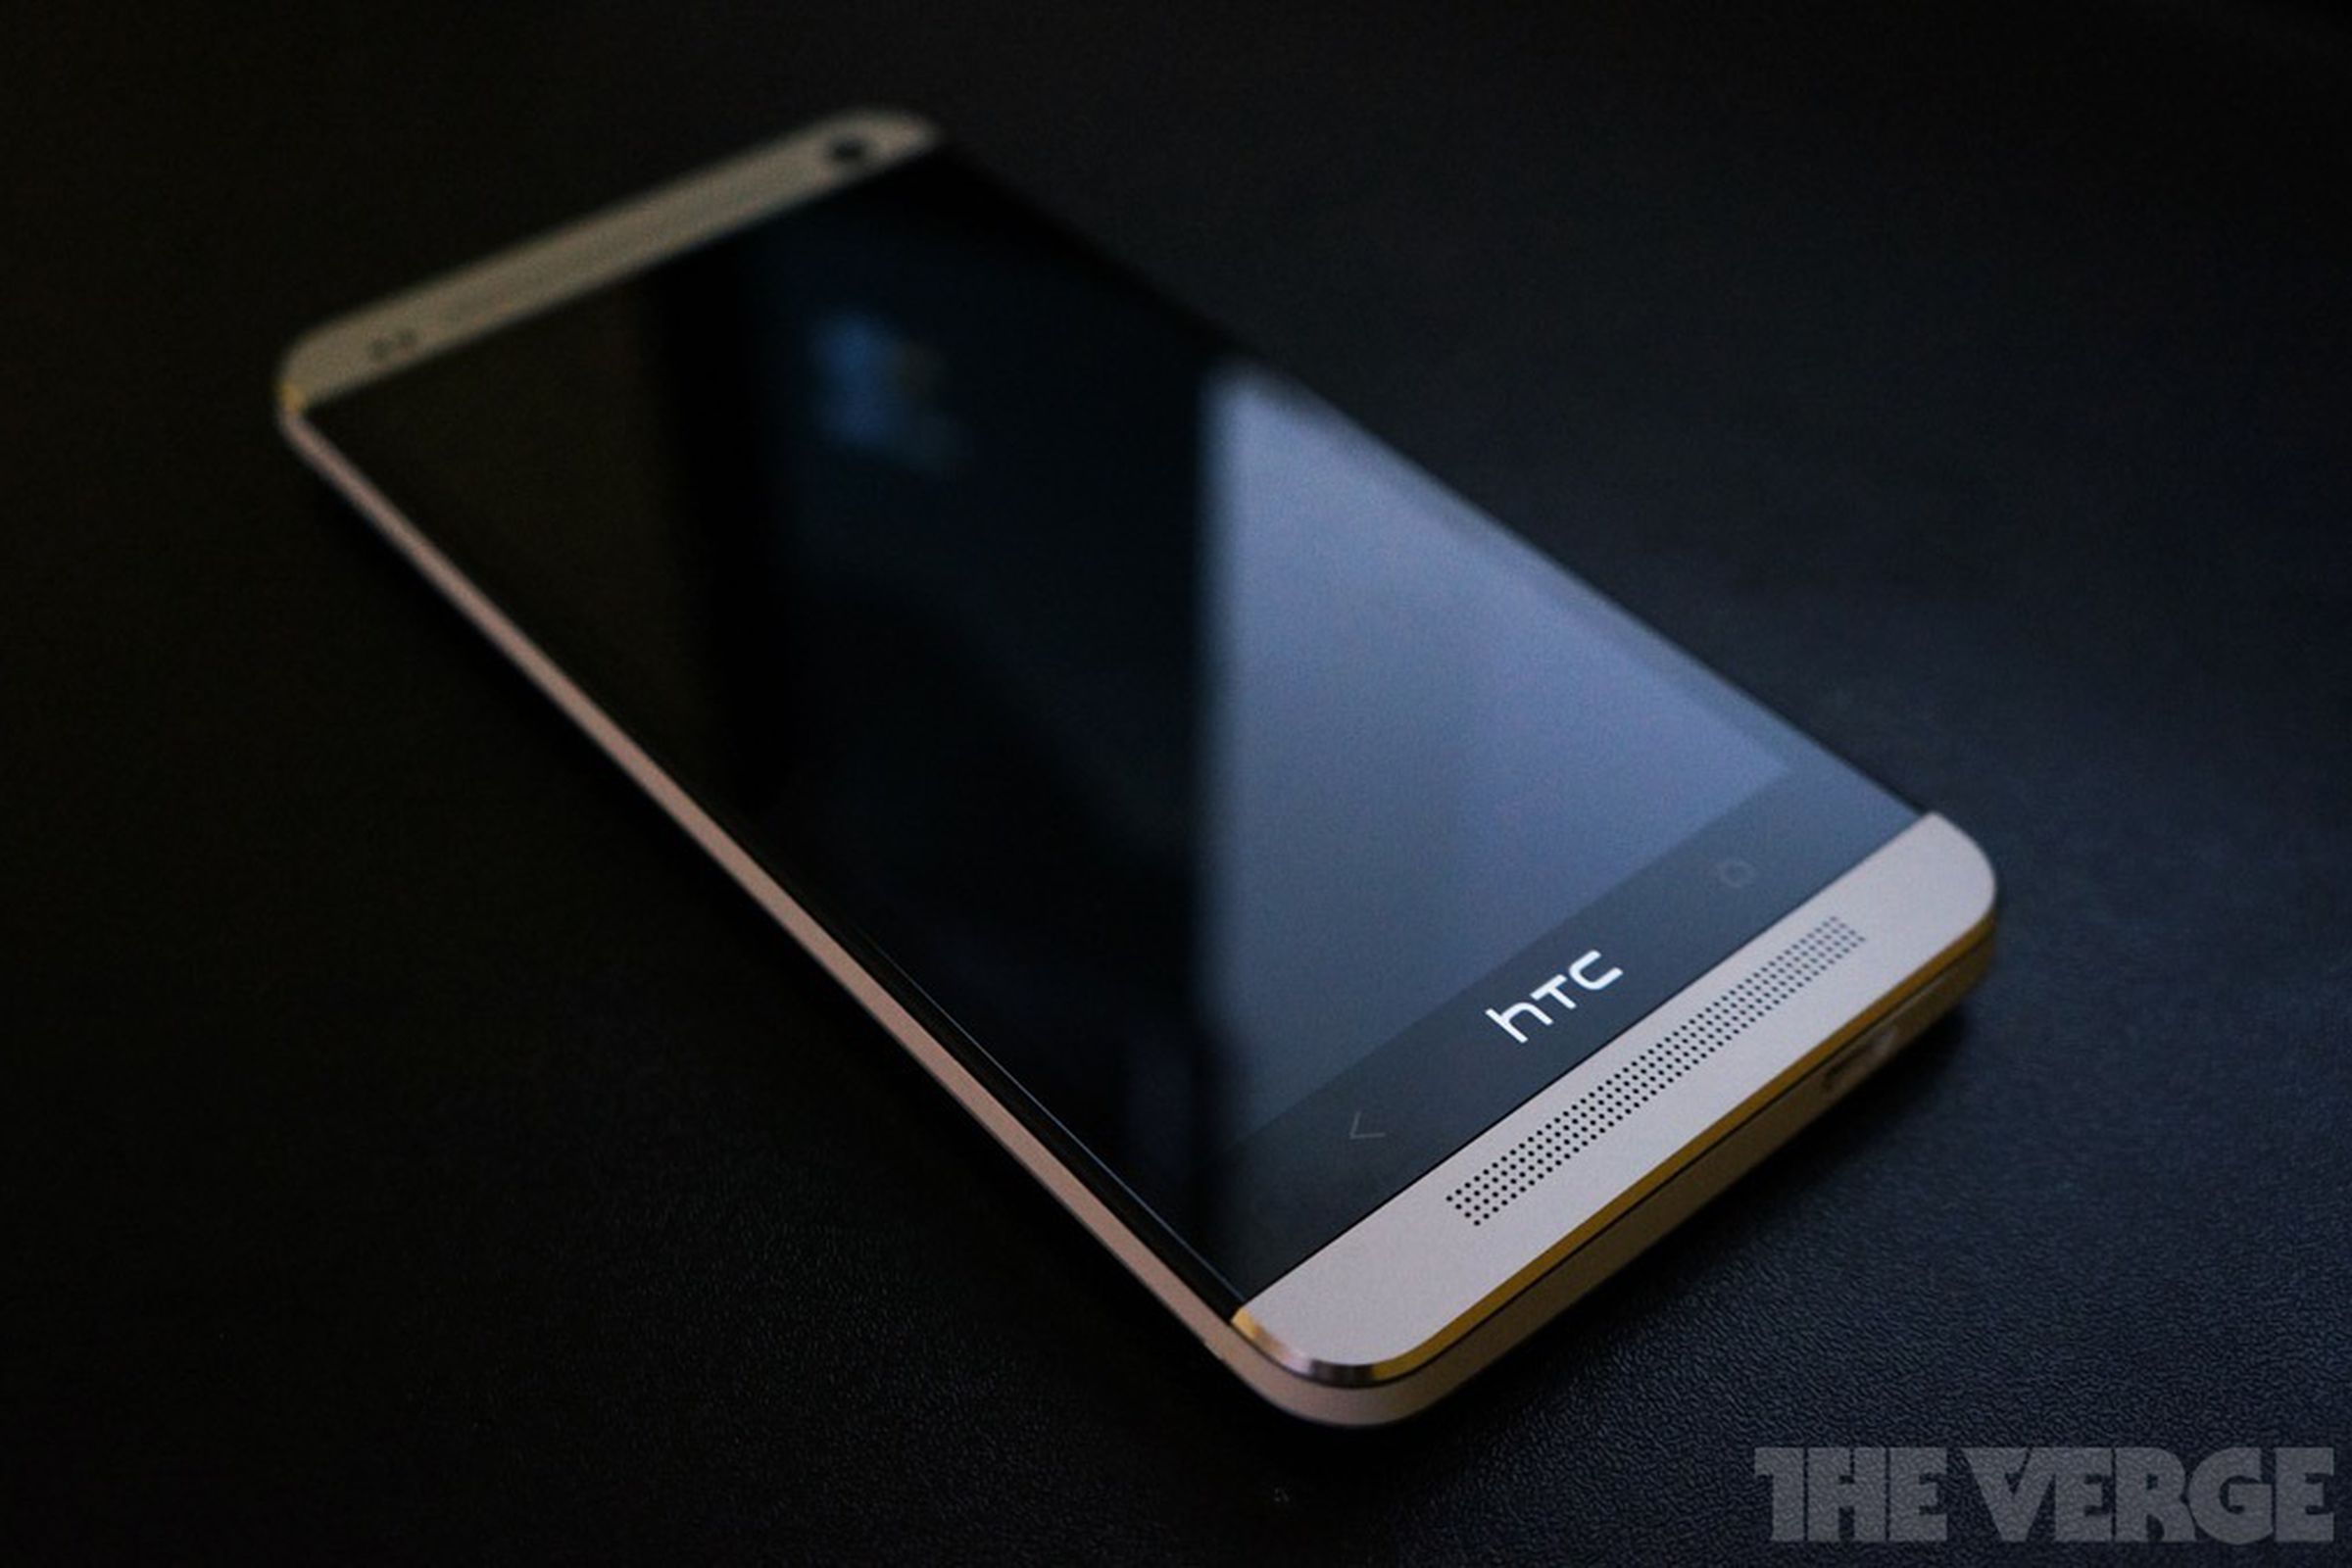 HTC One (stock image)